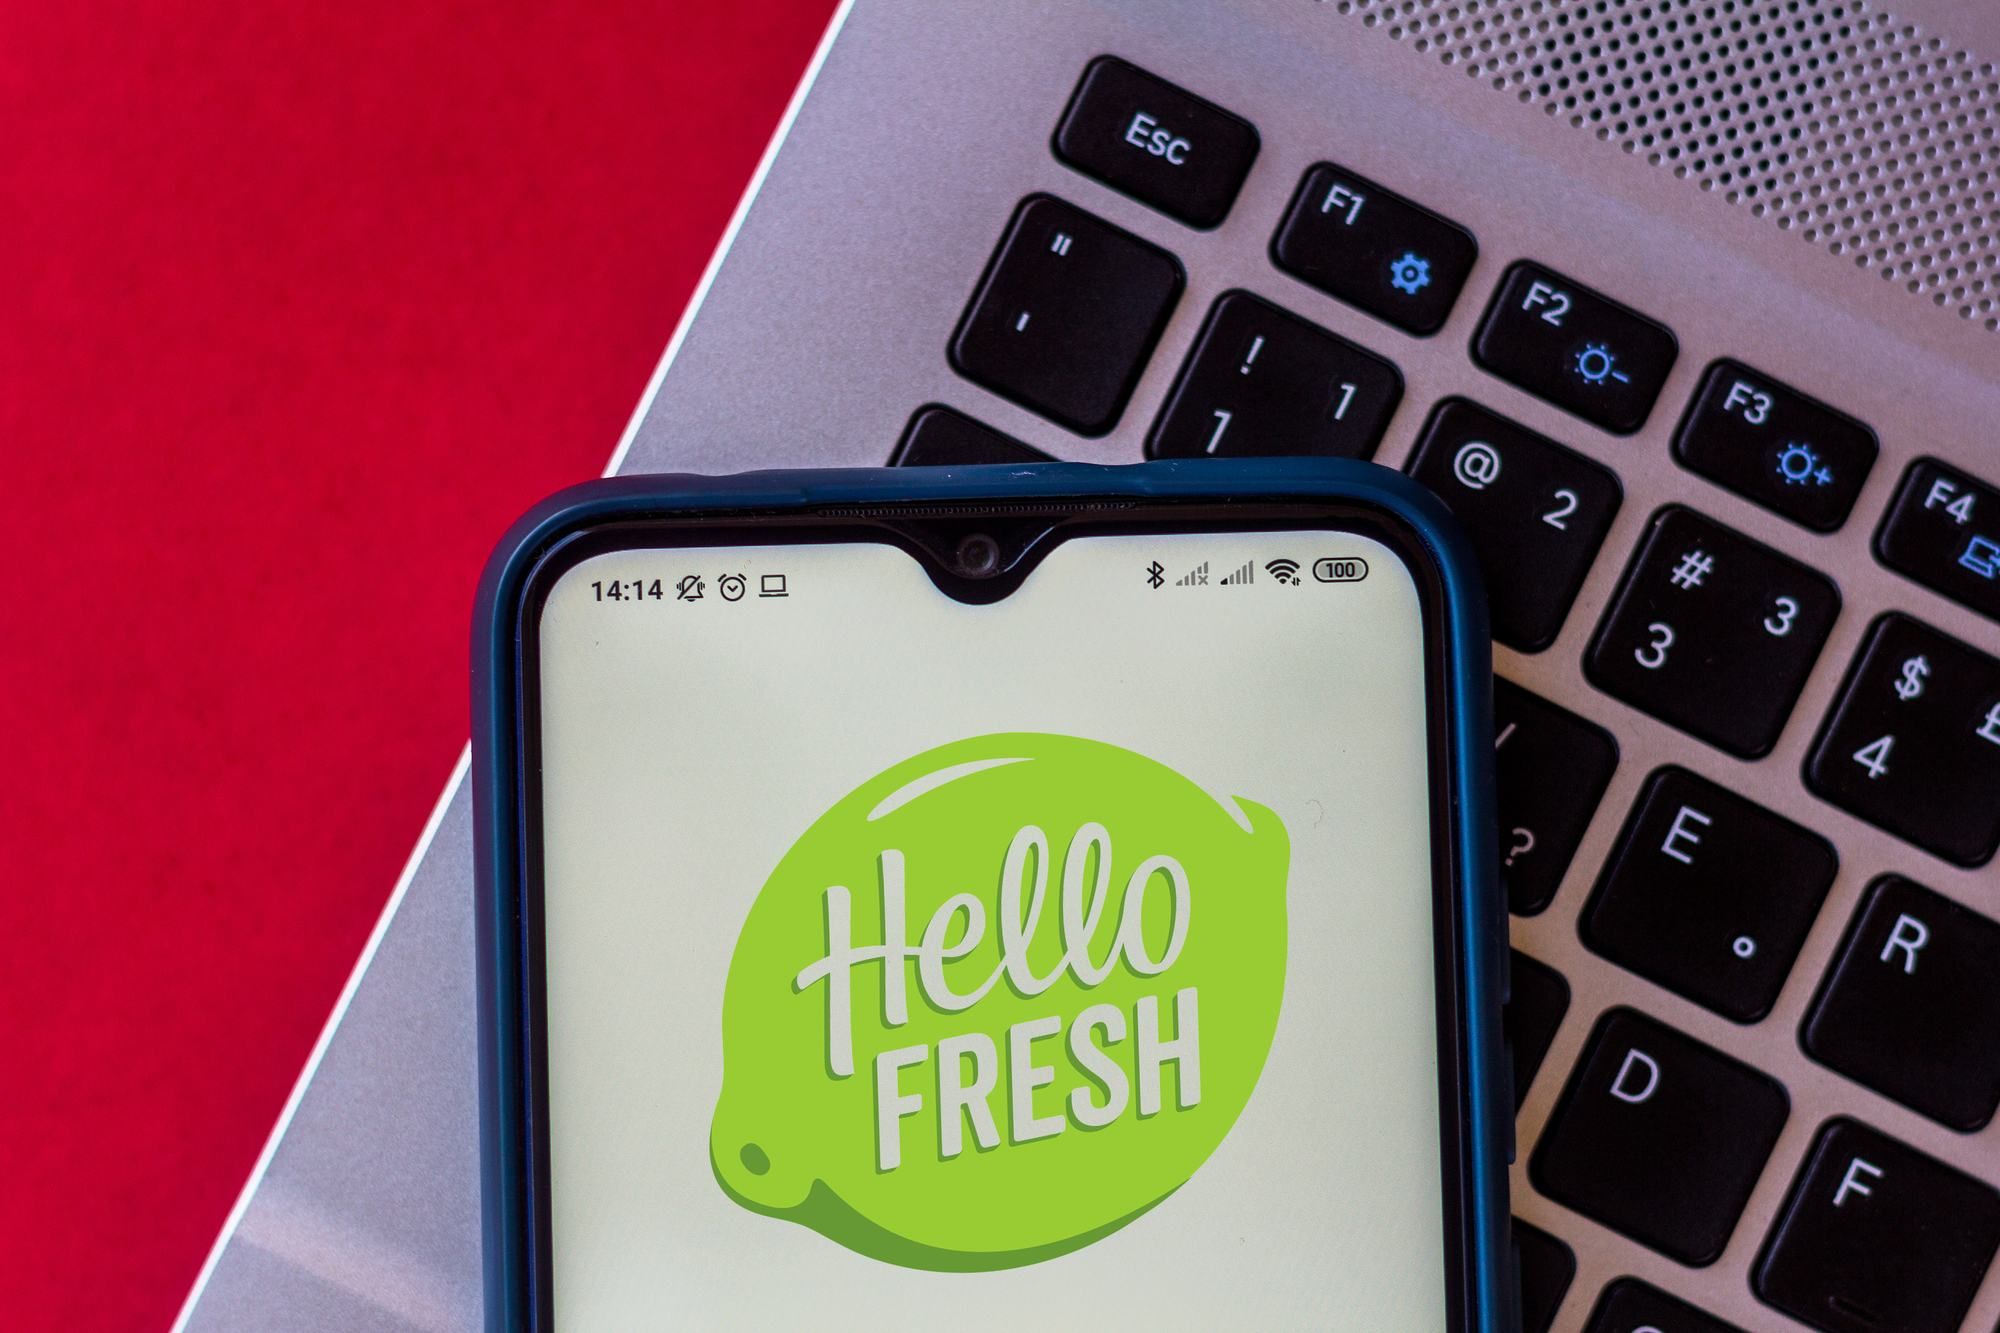 HelloFresh Wants To Pay $14M To End TCPA Suit 